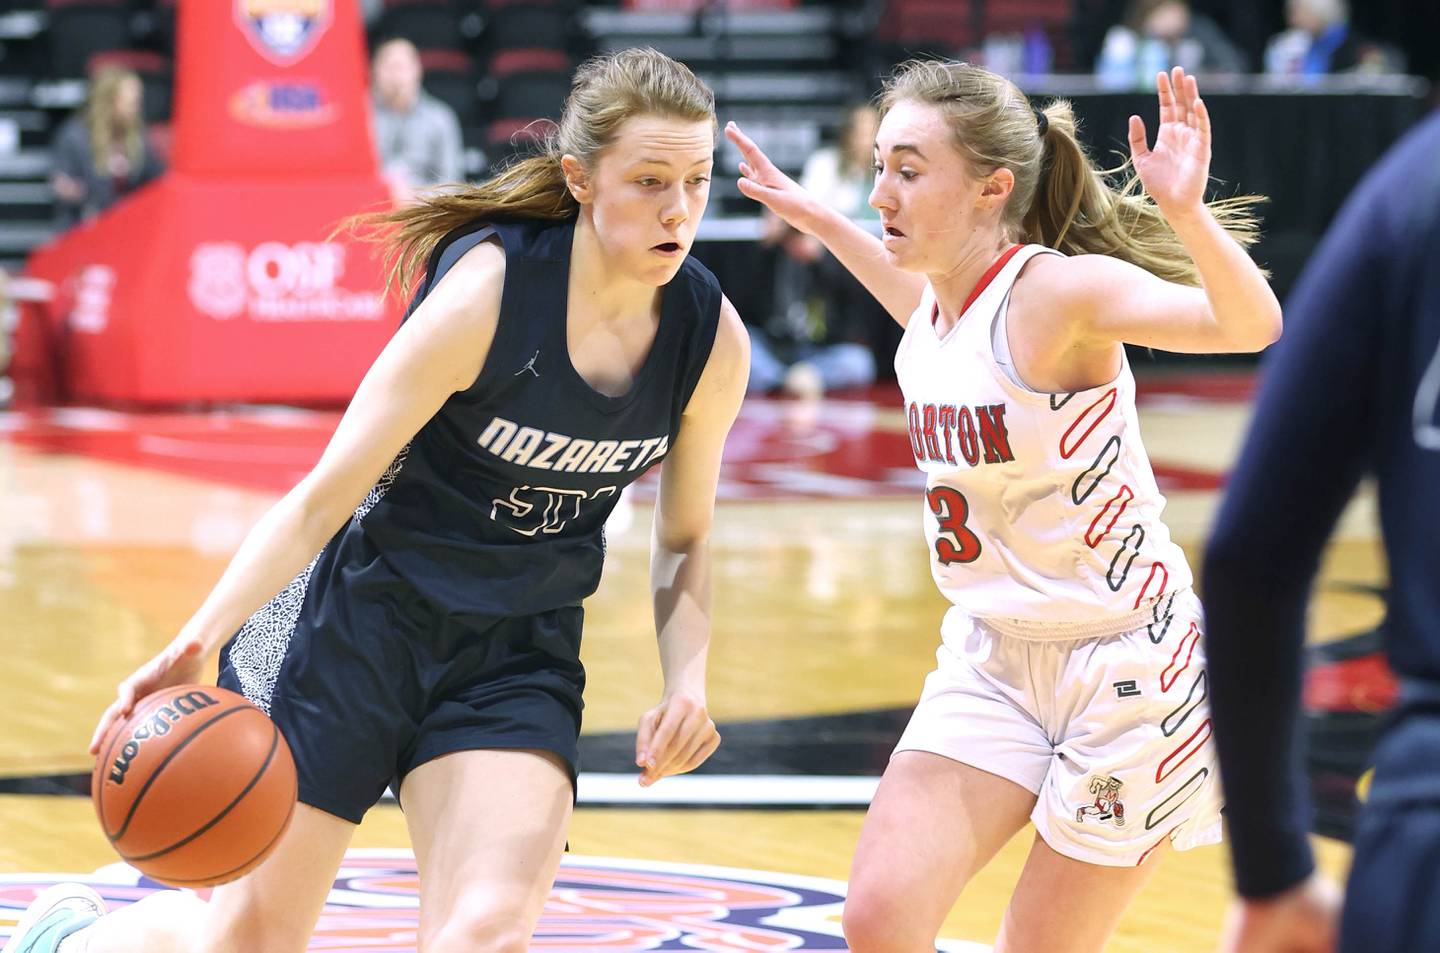 Nazareth's Caroline Workman drives against Morton's Paige Griffin during their Class 3A state semifinal game Friday, March 4, 2022, in Redbird Arena at Illinois State University in Normal.